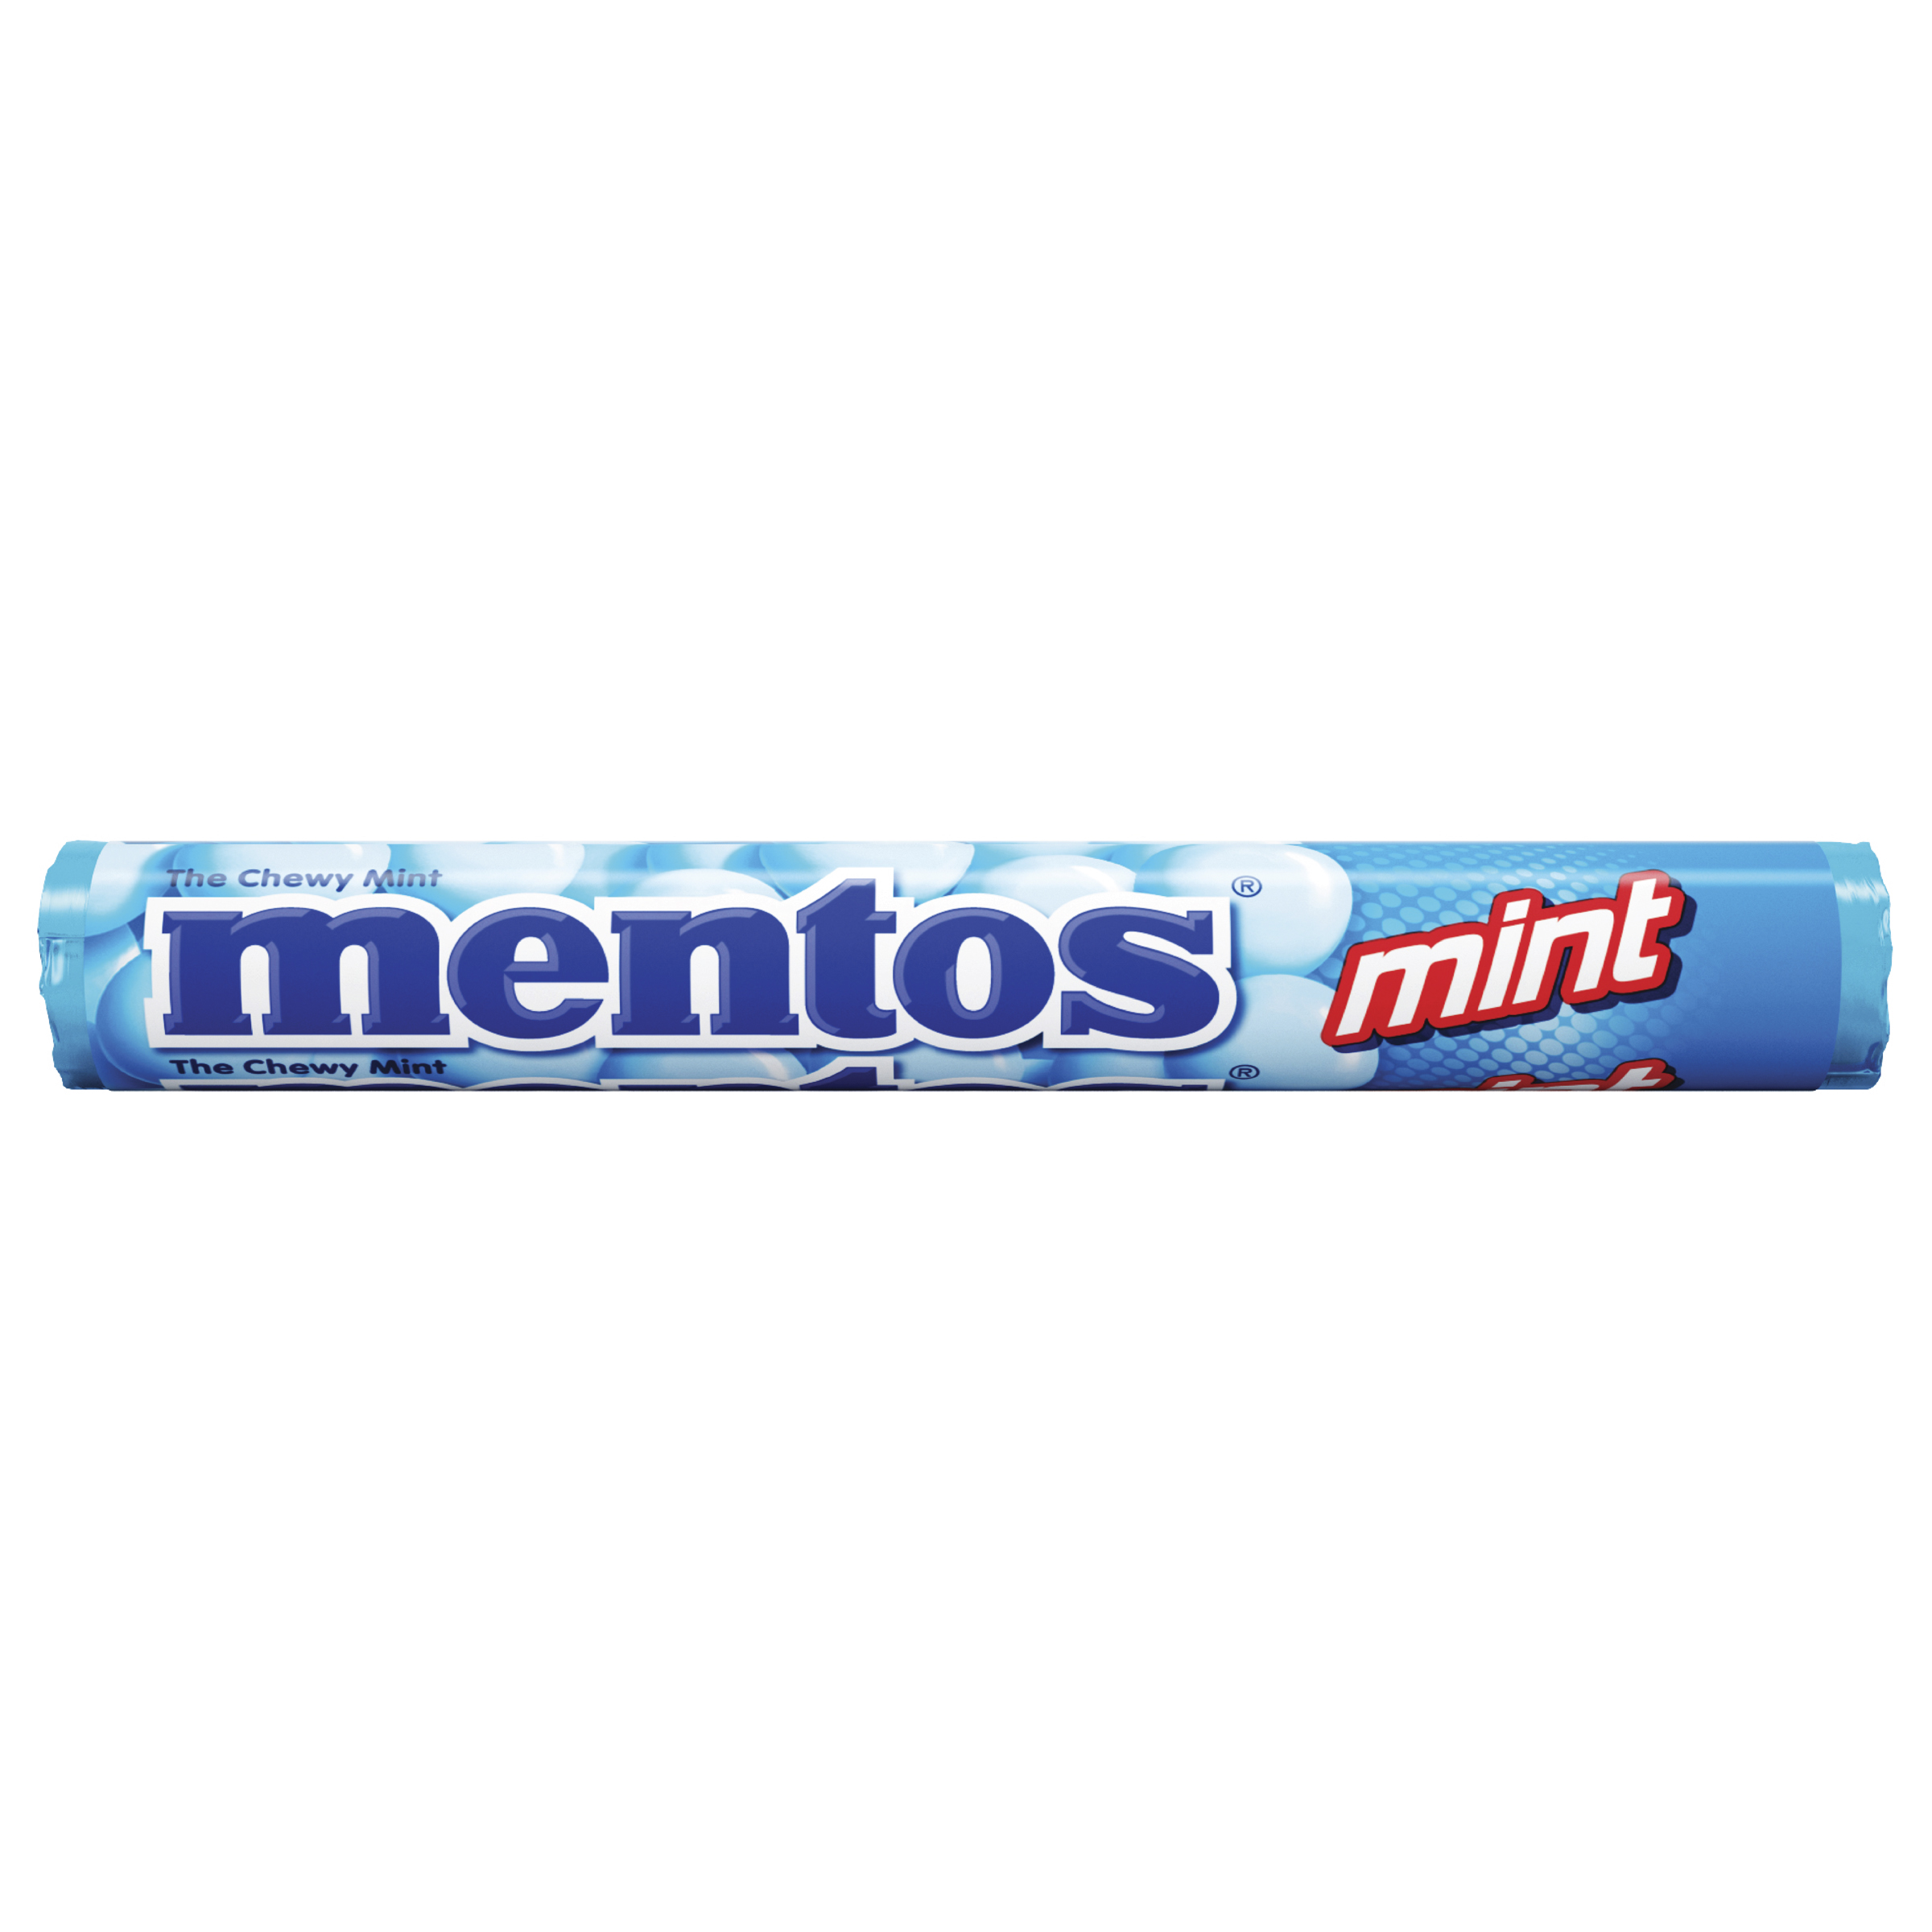 Mentos Chewy Mint Candy Roll, Fresh Mint Flavor, Peanut and Tree Nut Free, Regular Size, 1.32 oz - image 2 of 7